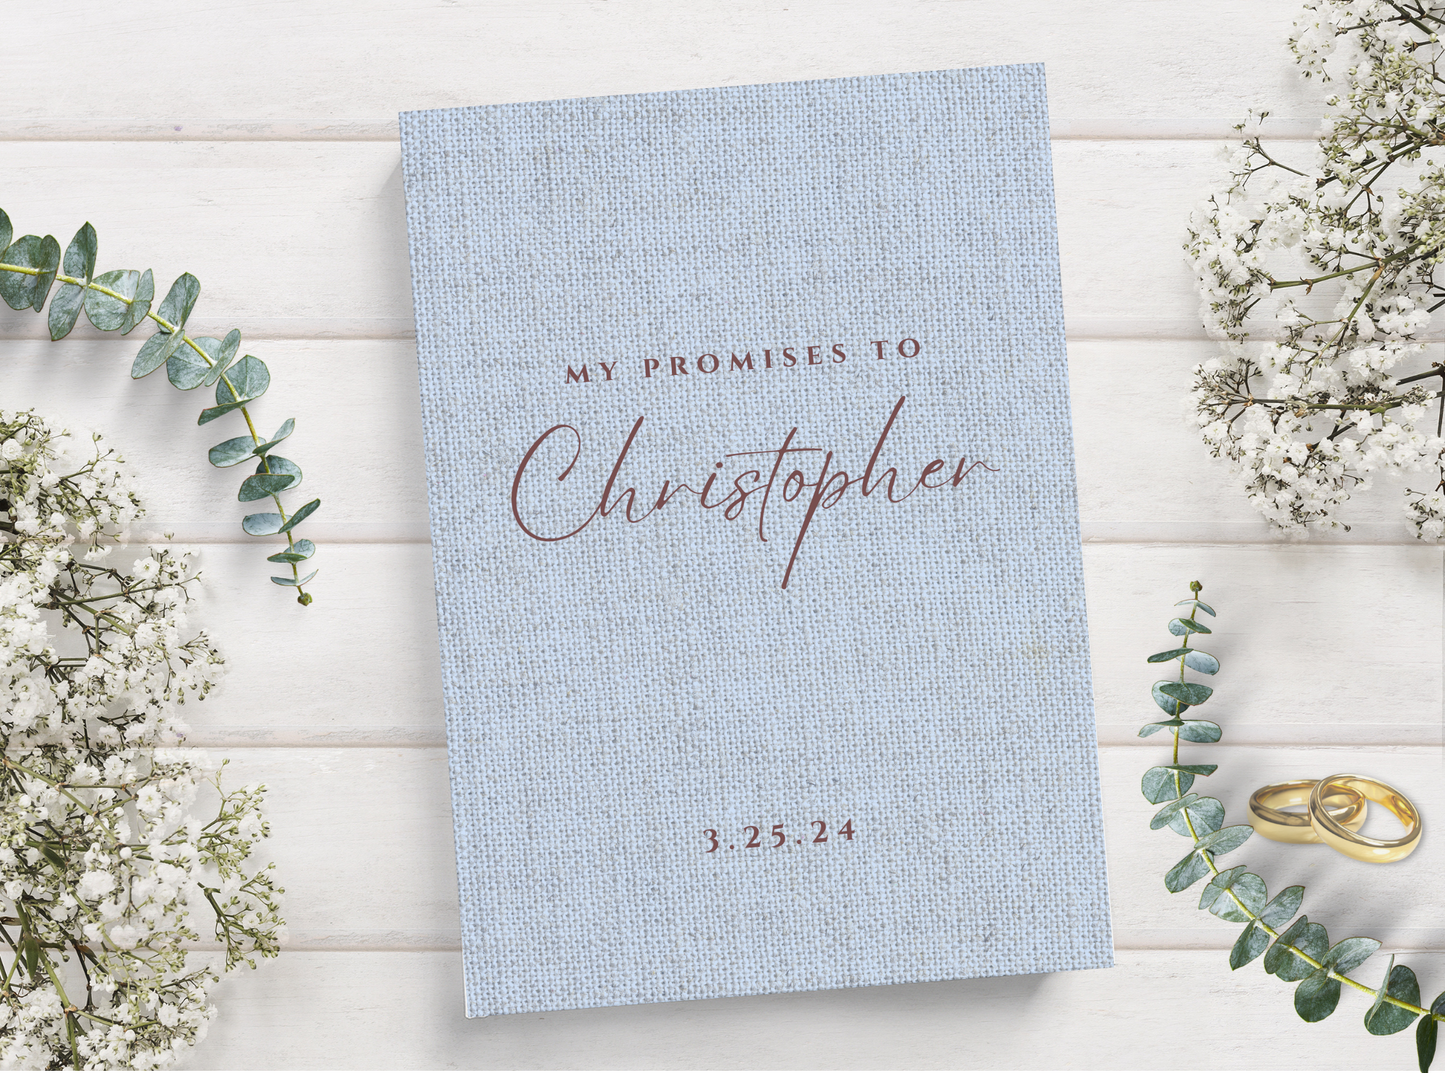 Wedding Vow Book of Promises Hard Cover Wedding Ceremony Vow Booklets, Speech Notes, Wedding Gift, Couple Engagement Gift, Bride Groom Gift